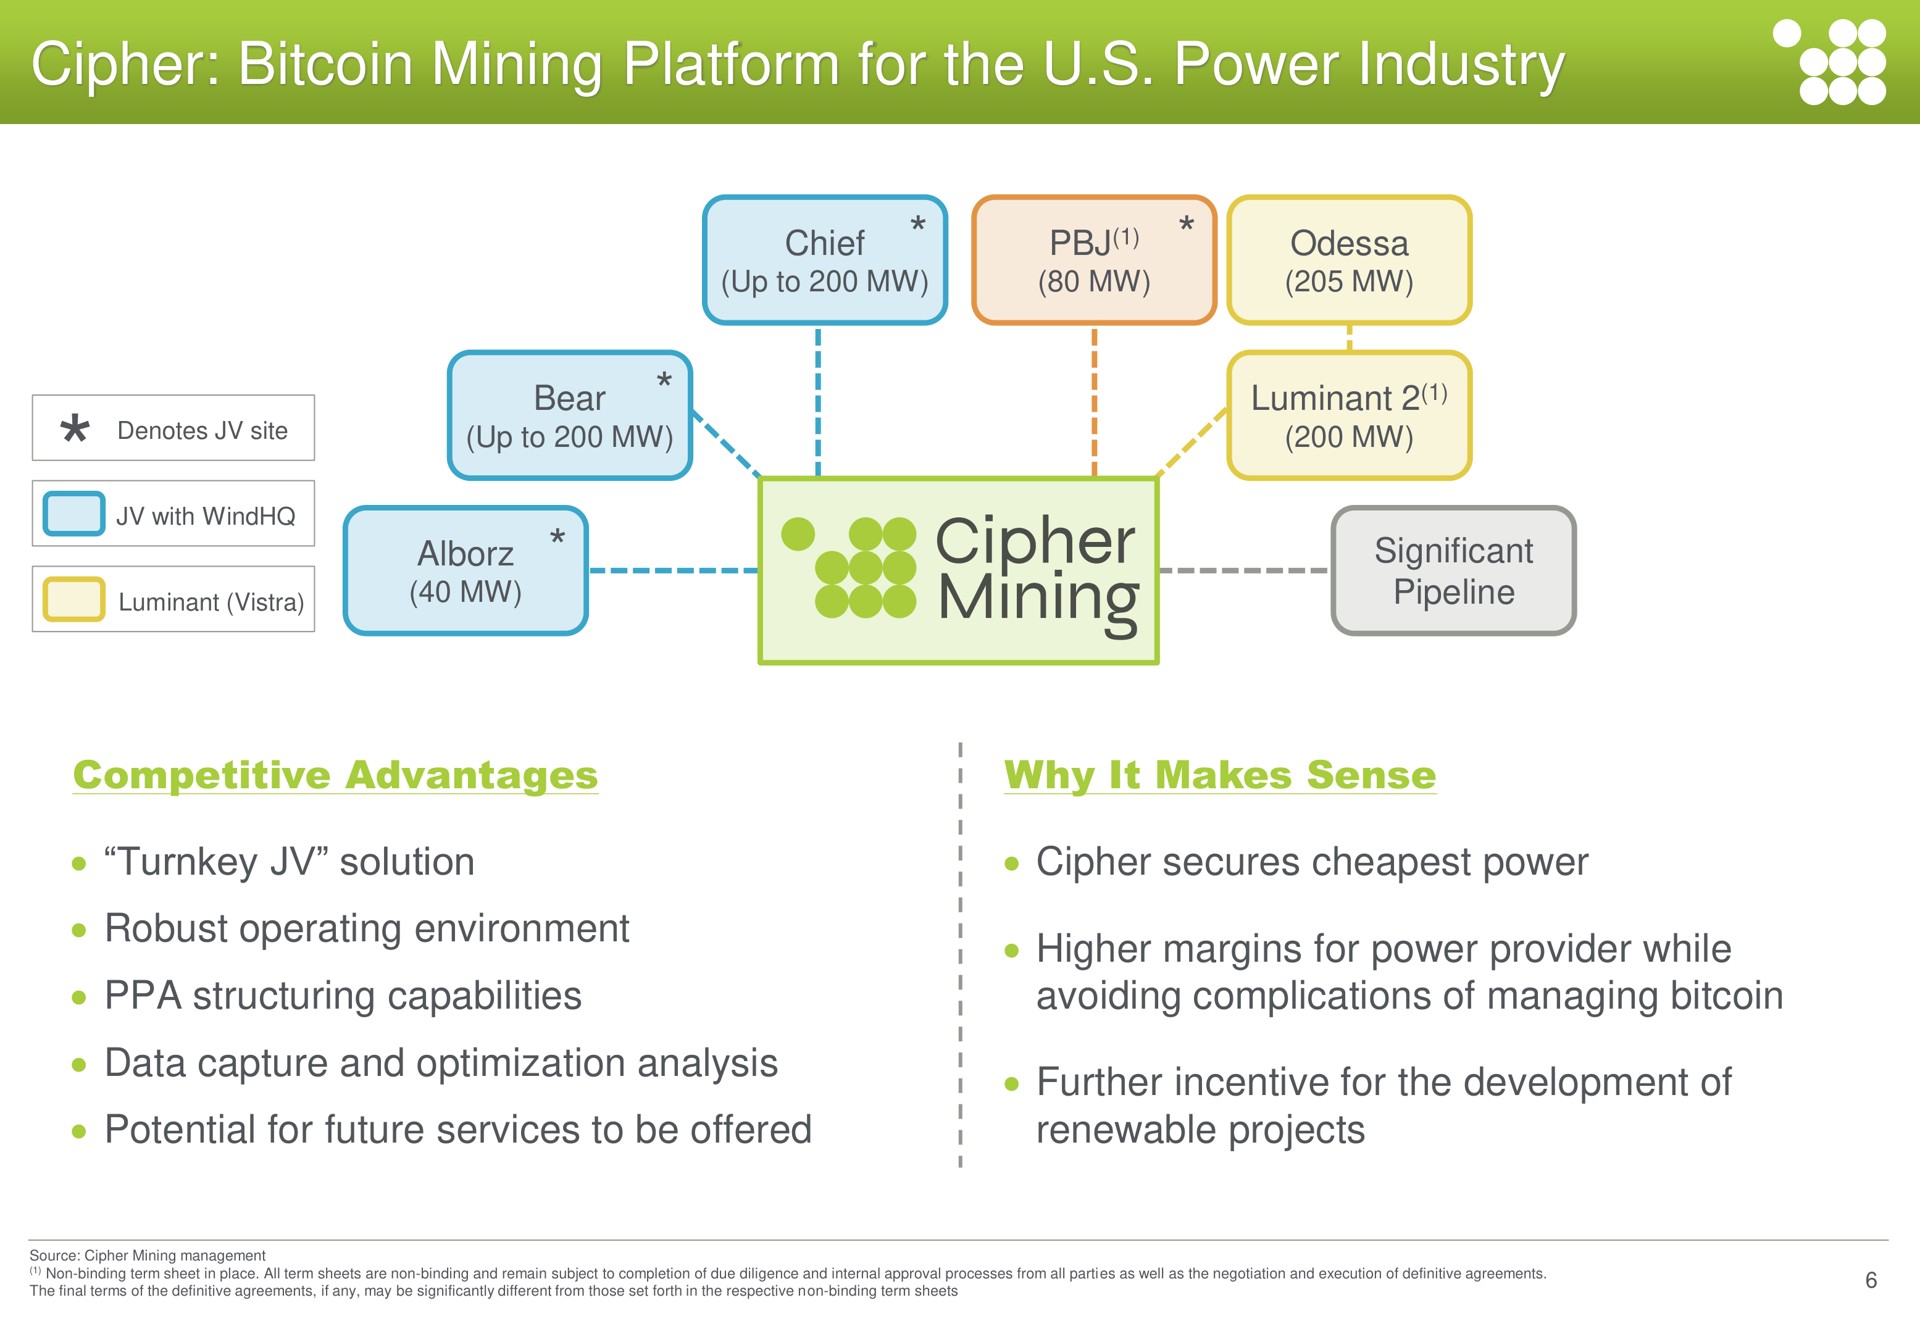 cipher mining platform for the power industry robust operating environment higher margins provider while | Cipher Mining